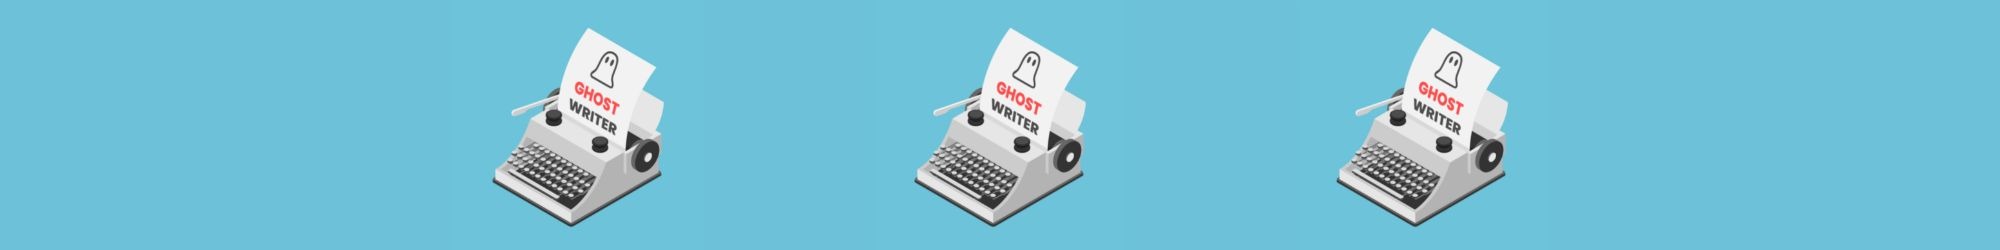 become ghostwriter 3